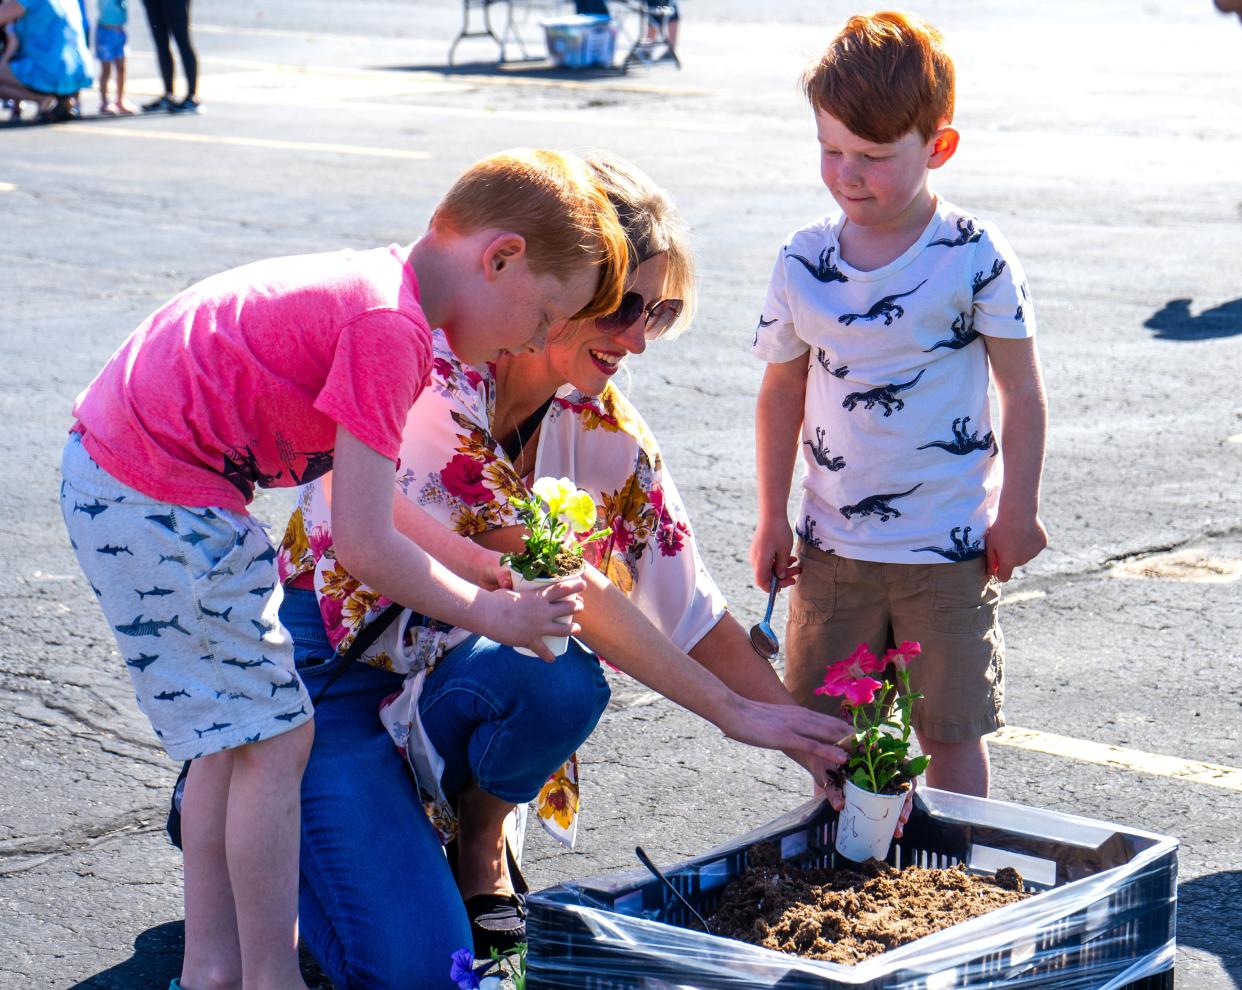 At Monroe County Intermediate School District's "Growing Abilities" event (from left) Sam, Allison and Jasper Buber plant flowers to take home.